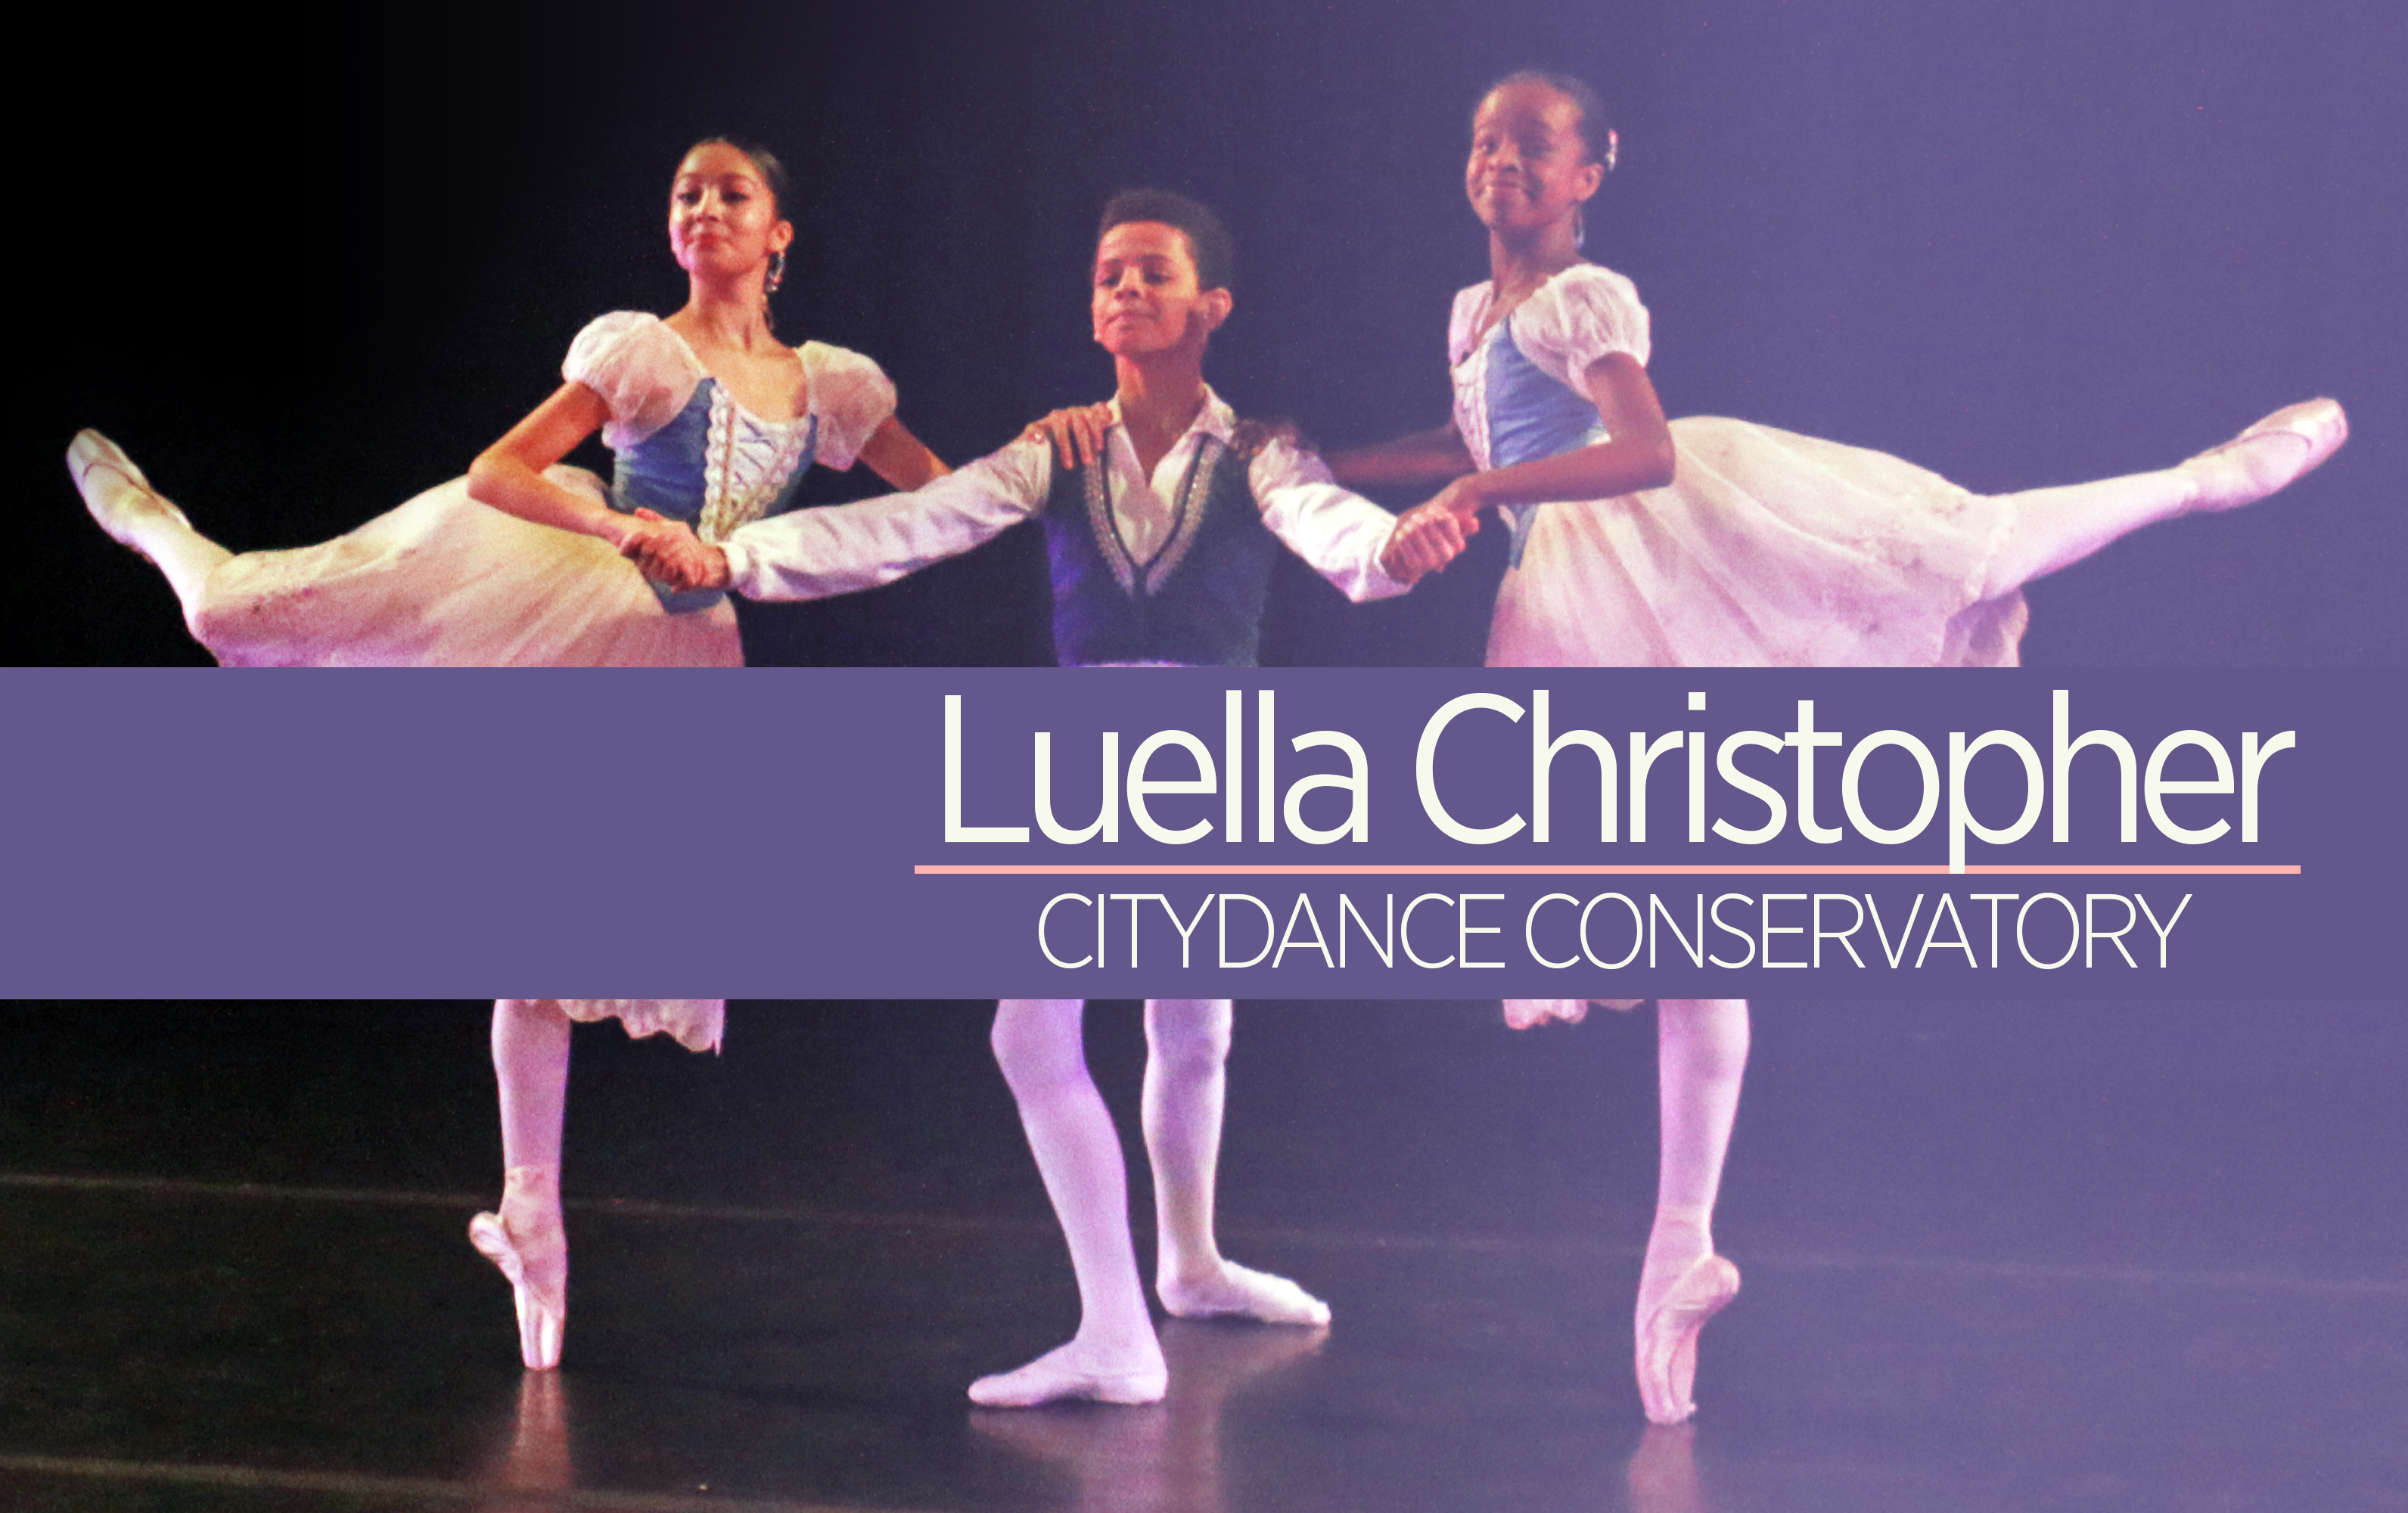 CITYDANCE CONSERVATORY at Strathmore by LUELLA CHRISTOPHER